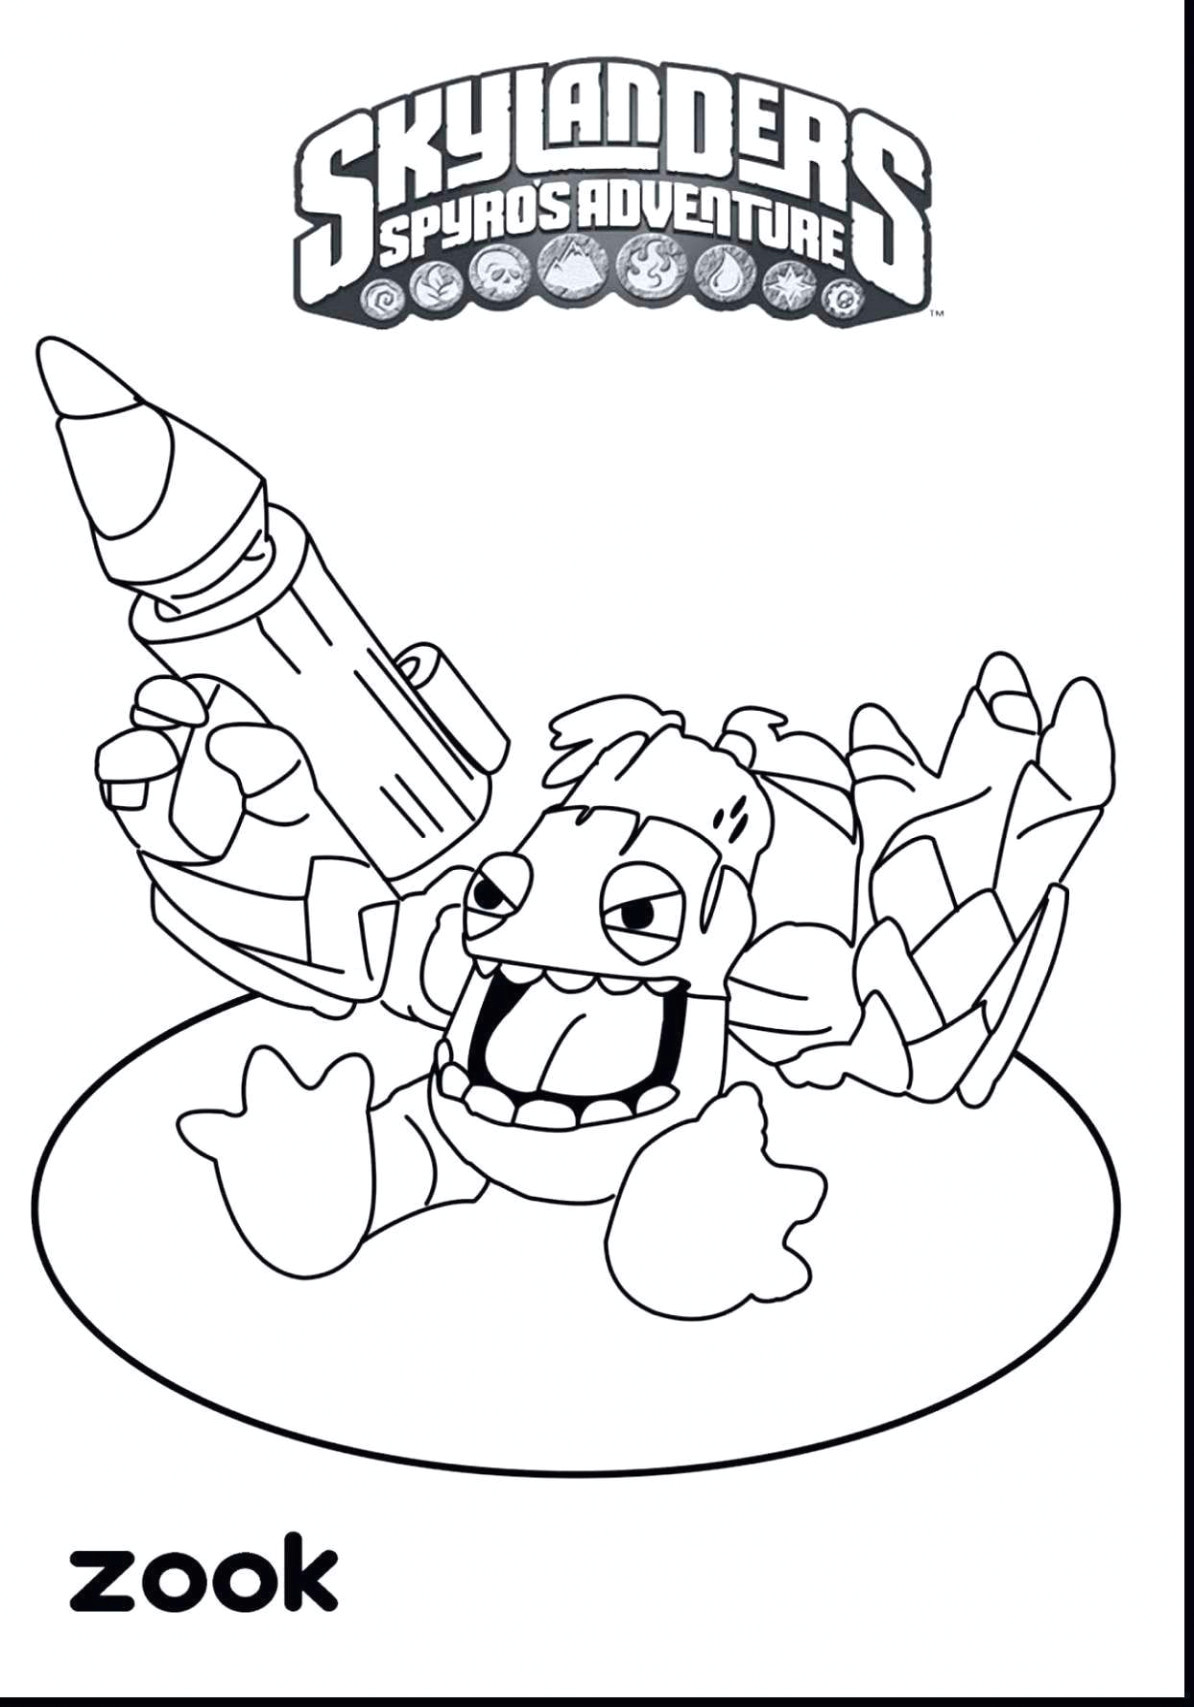 castles coloring pages christmas crafts coloring pages coloring pages for christmas printable cool coloring printables 0d